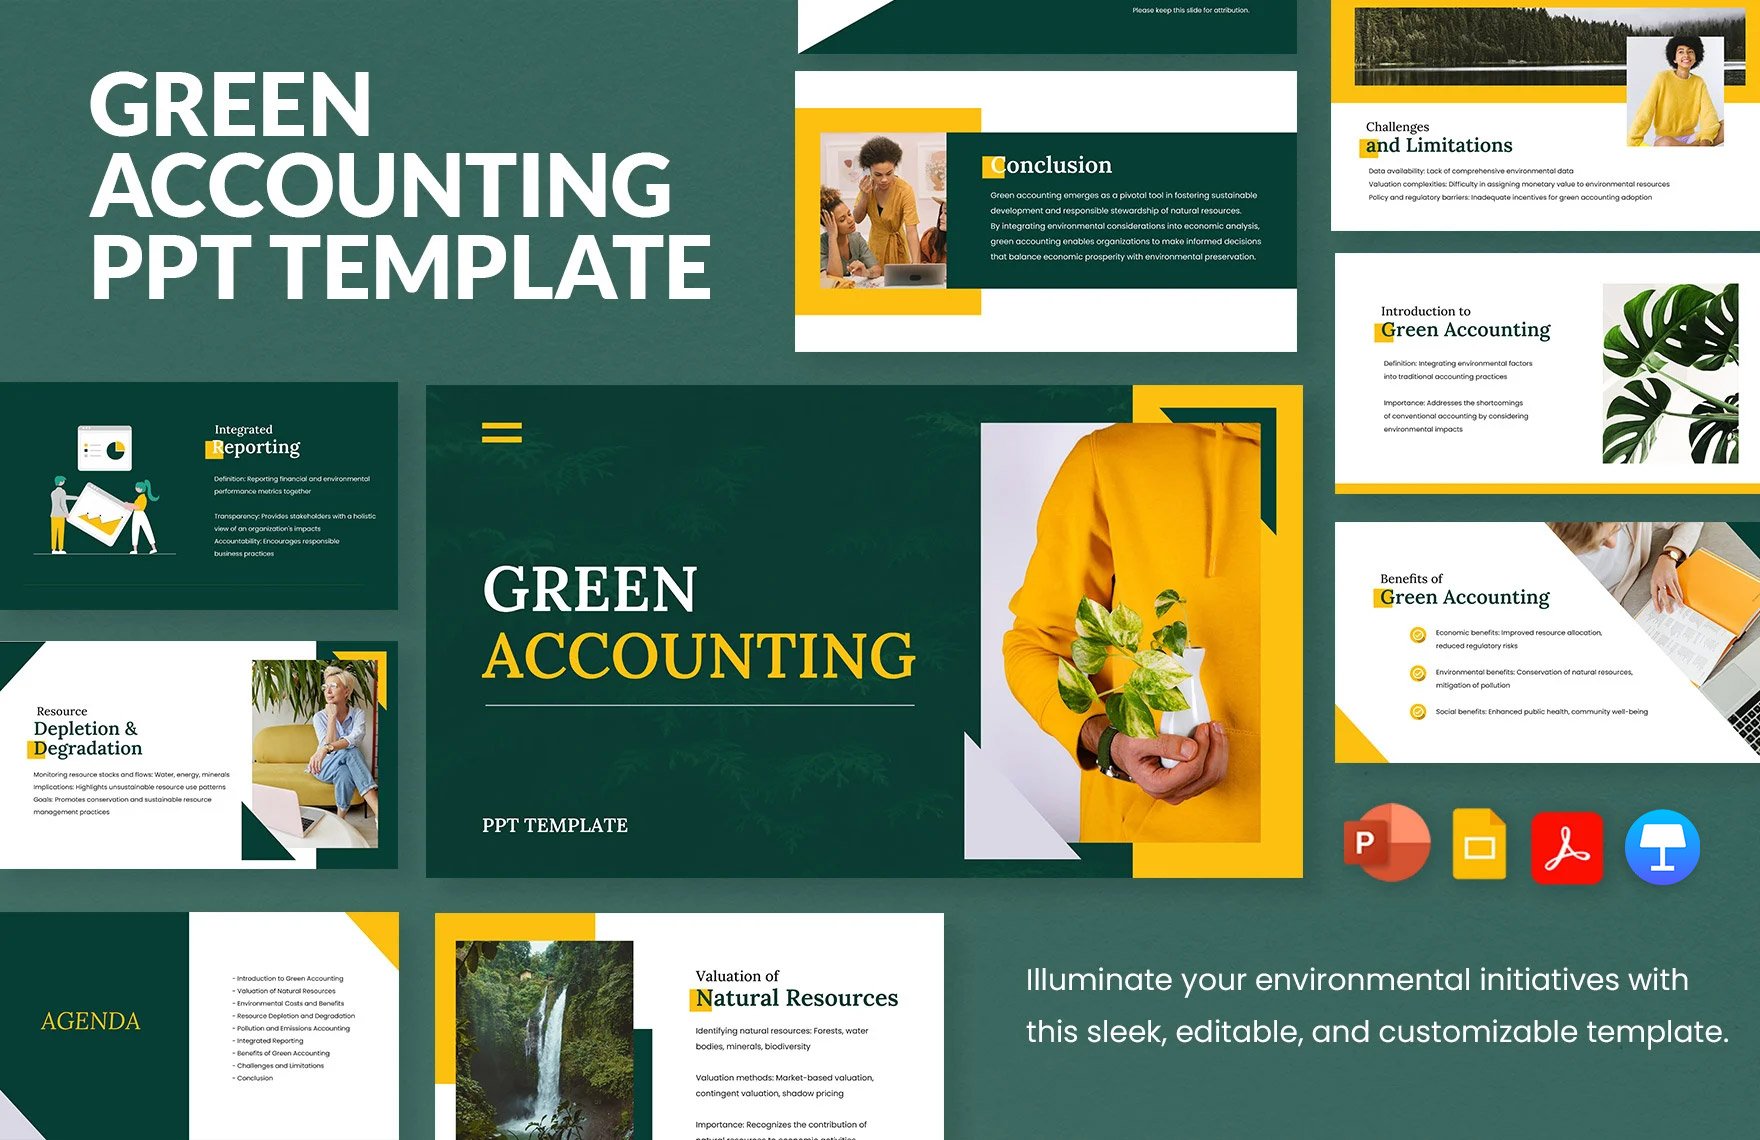 Green Accounting PPT Template in PDF, PowerPoint, Google Slides, Apple Keynote